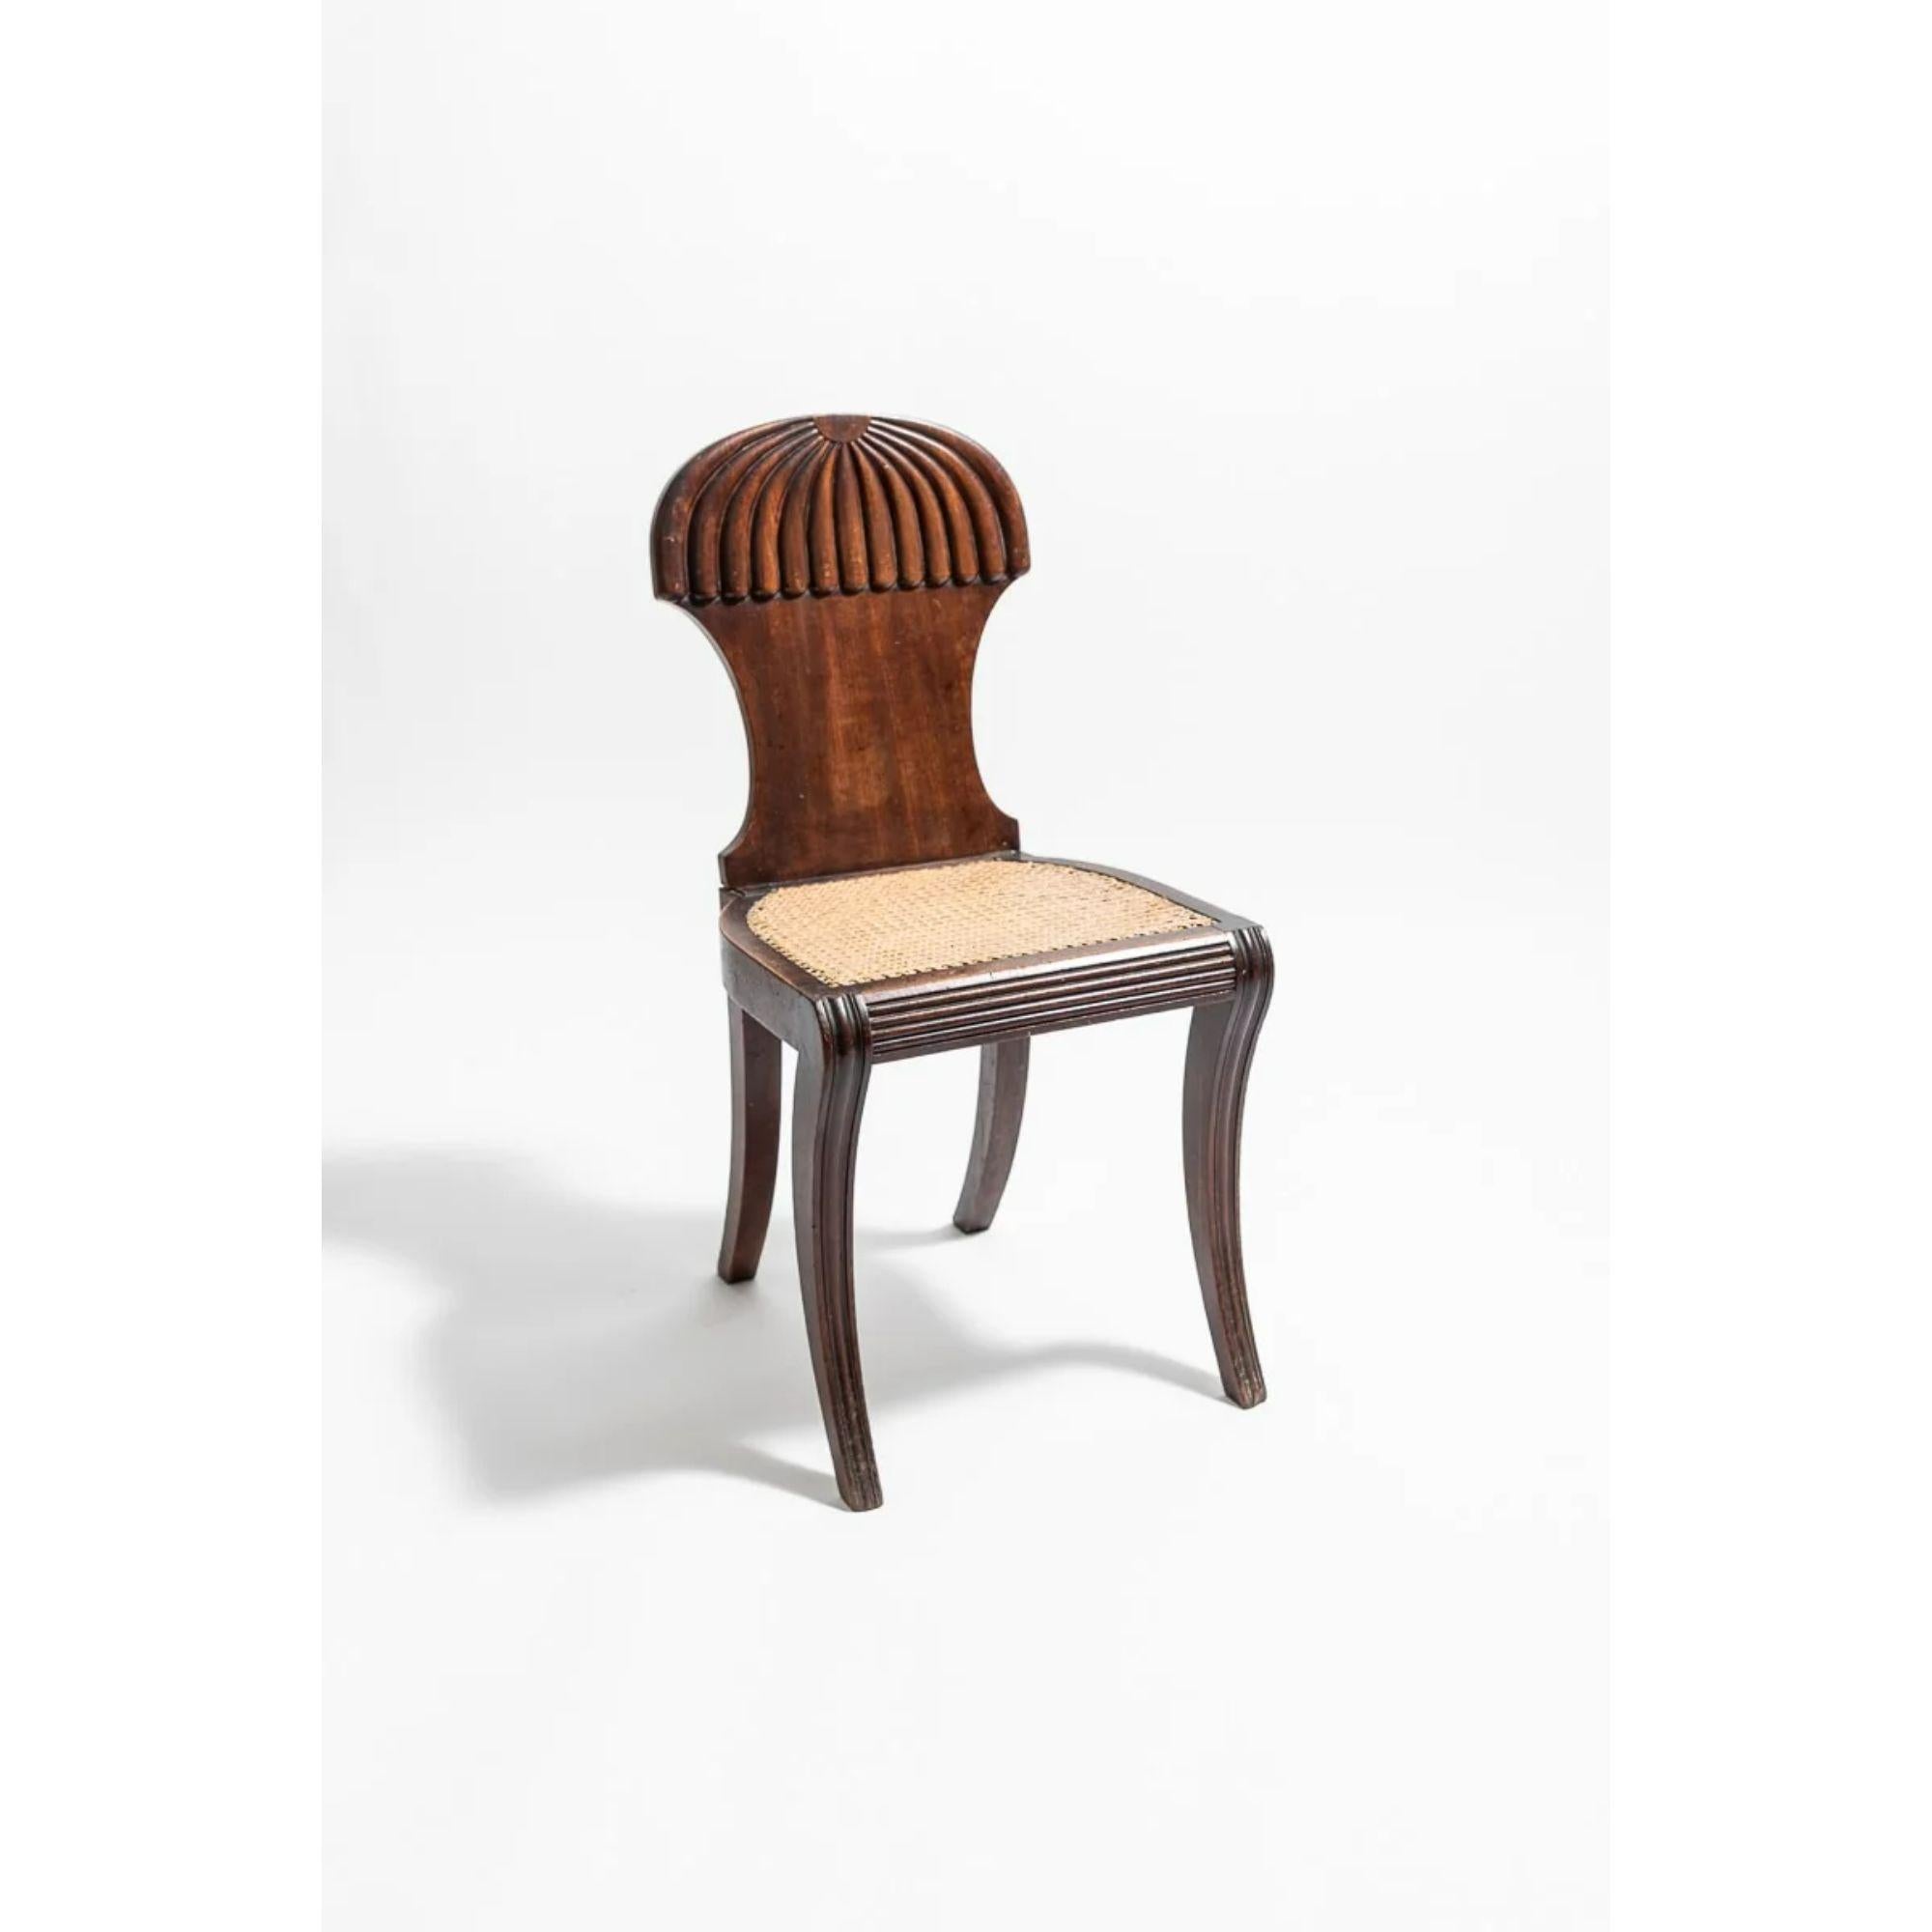 Regency mahogany hall chair by Gillows, circa 1815

The waisted backrest with arched top over relief carved descending lobes, with canework seat above sabre front and splayed back legs, stamped gillows to underside.

Dimensions: H 85cm x W 41cm.